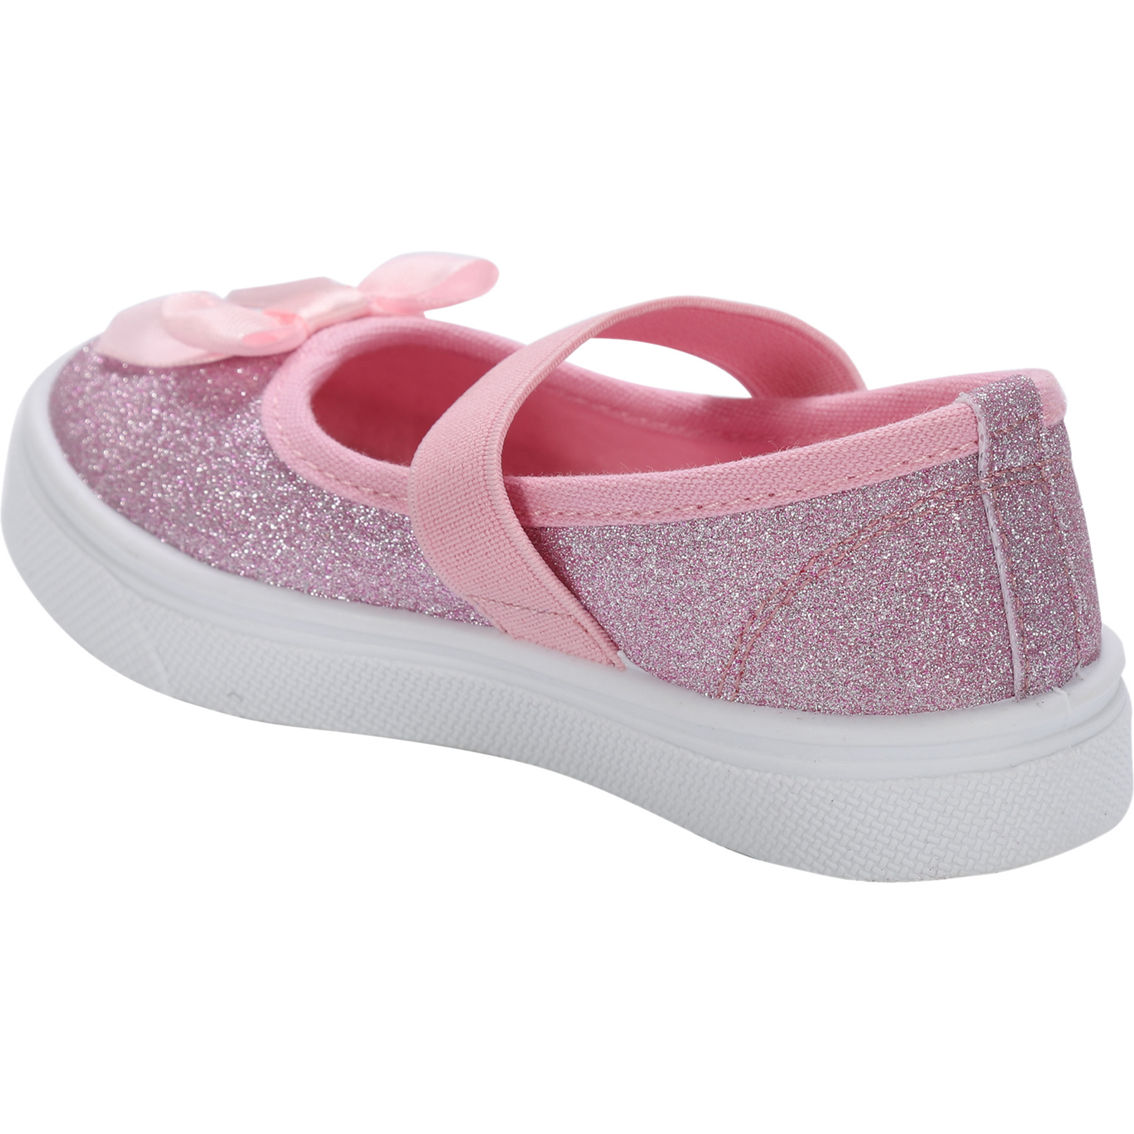 Oomphies Toddler Girls Quinn Mary Jane Shoes - Image 3 of 4